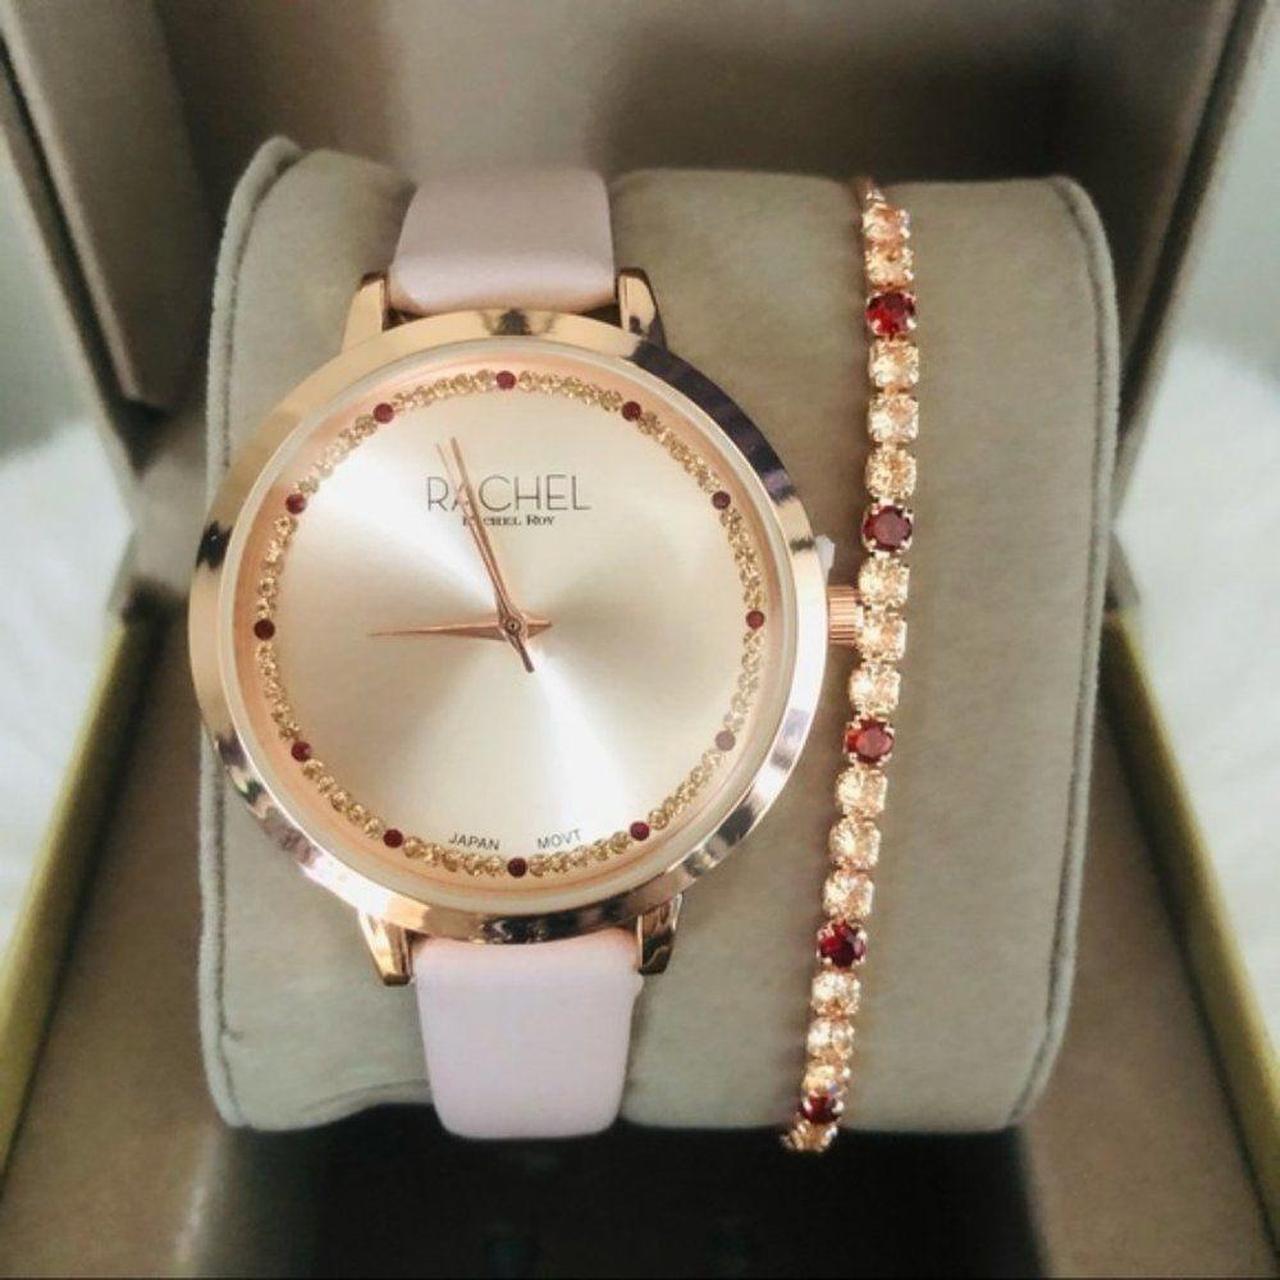 Bellabeat Crystal Bracelet Embellished Fashion Watch With Steel Band For  Women And Girls Quartz Movement Model P58 From Zichen080514, $14.26 |  DHgate.Com